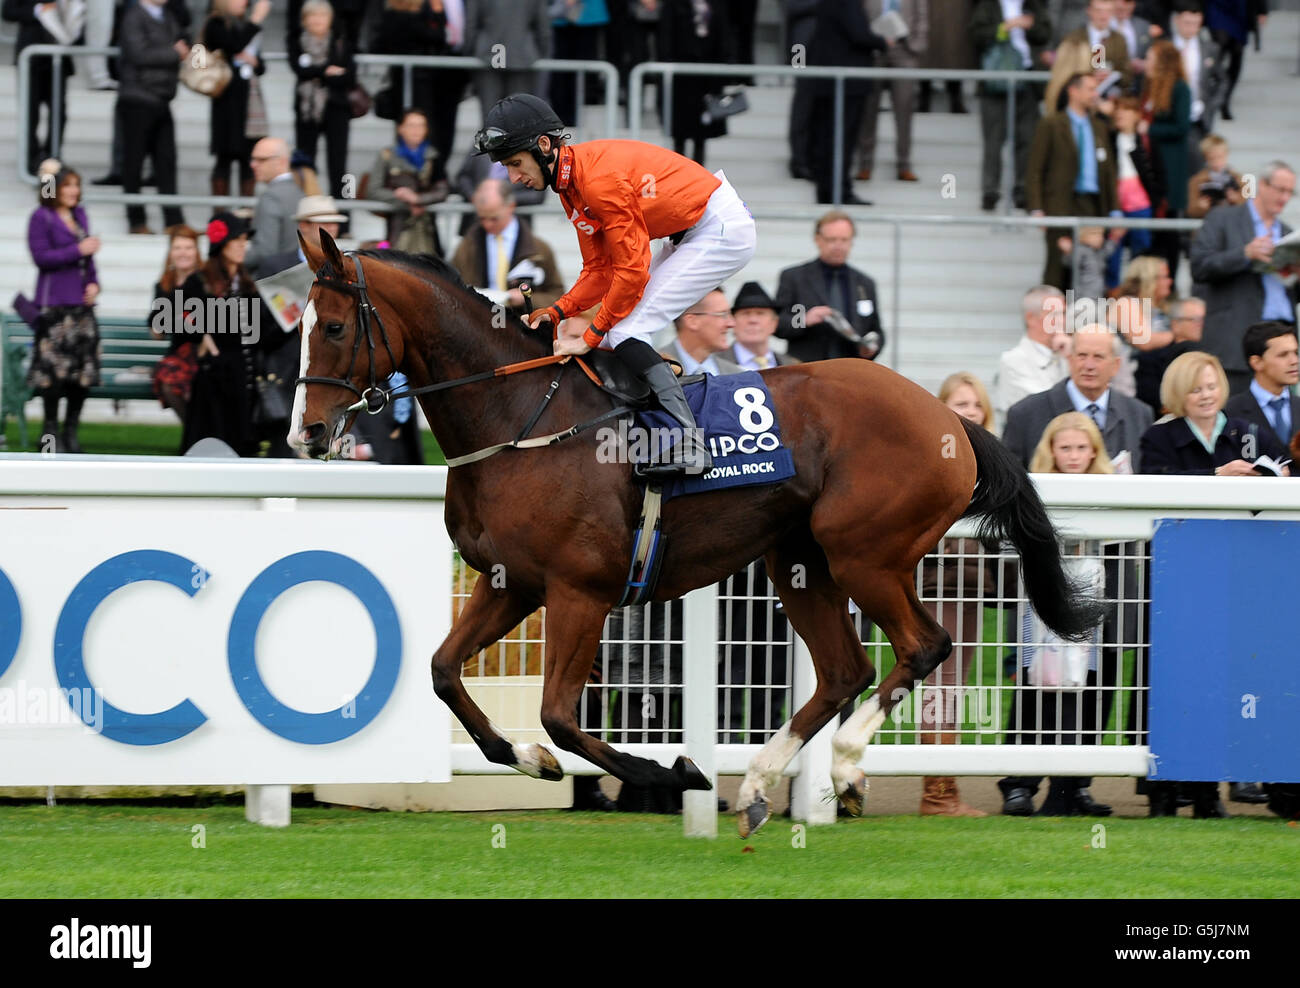 Royal Rock ridden by jockey George Baker goes to post for the Qipco British Champions Sprint Stakes Stock Photo